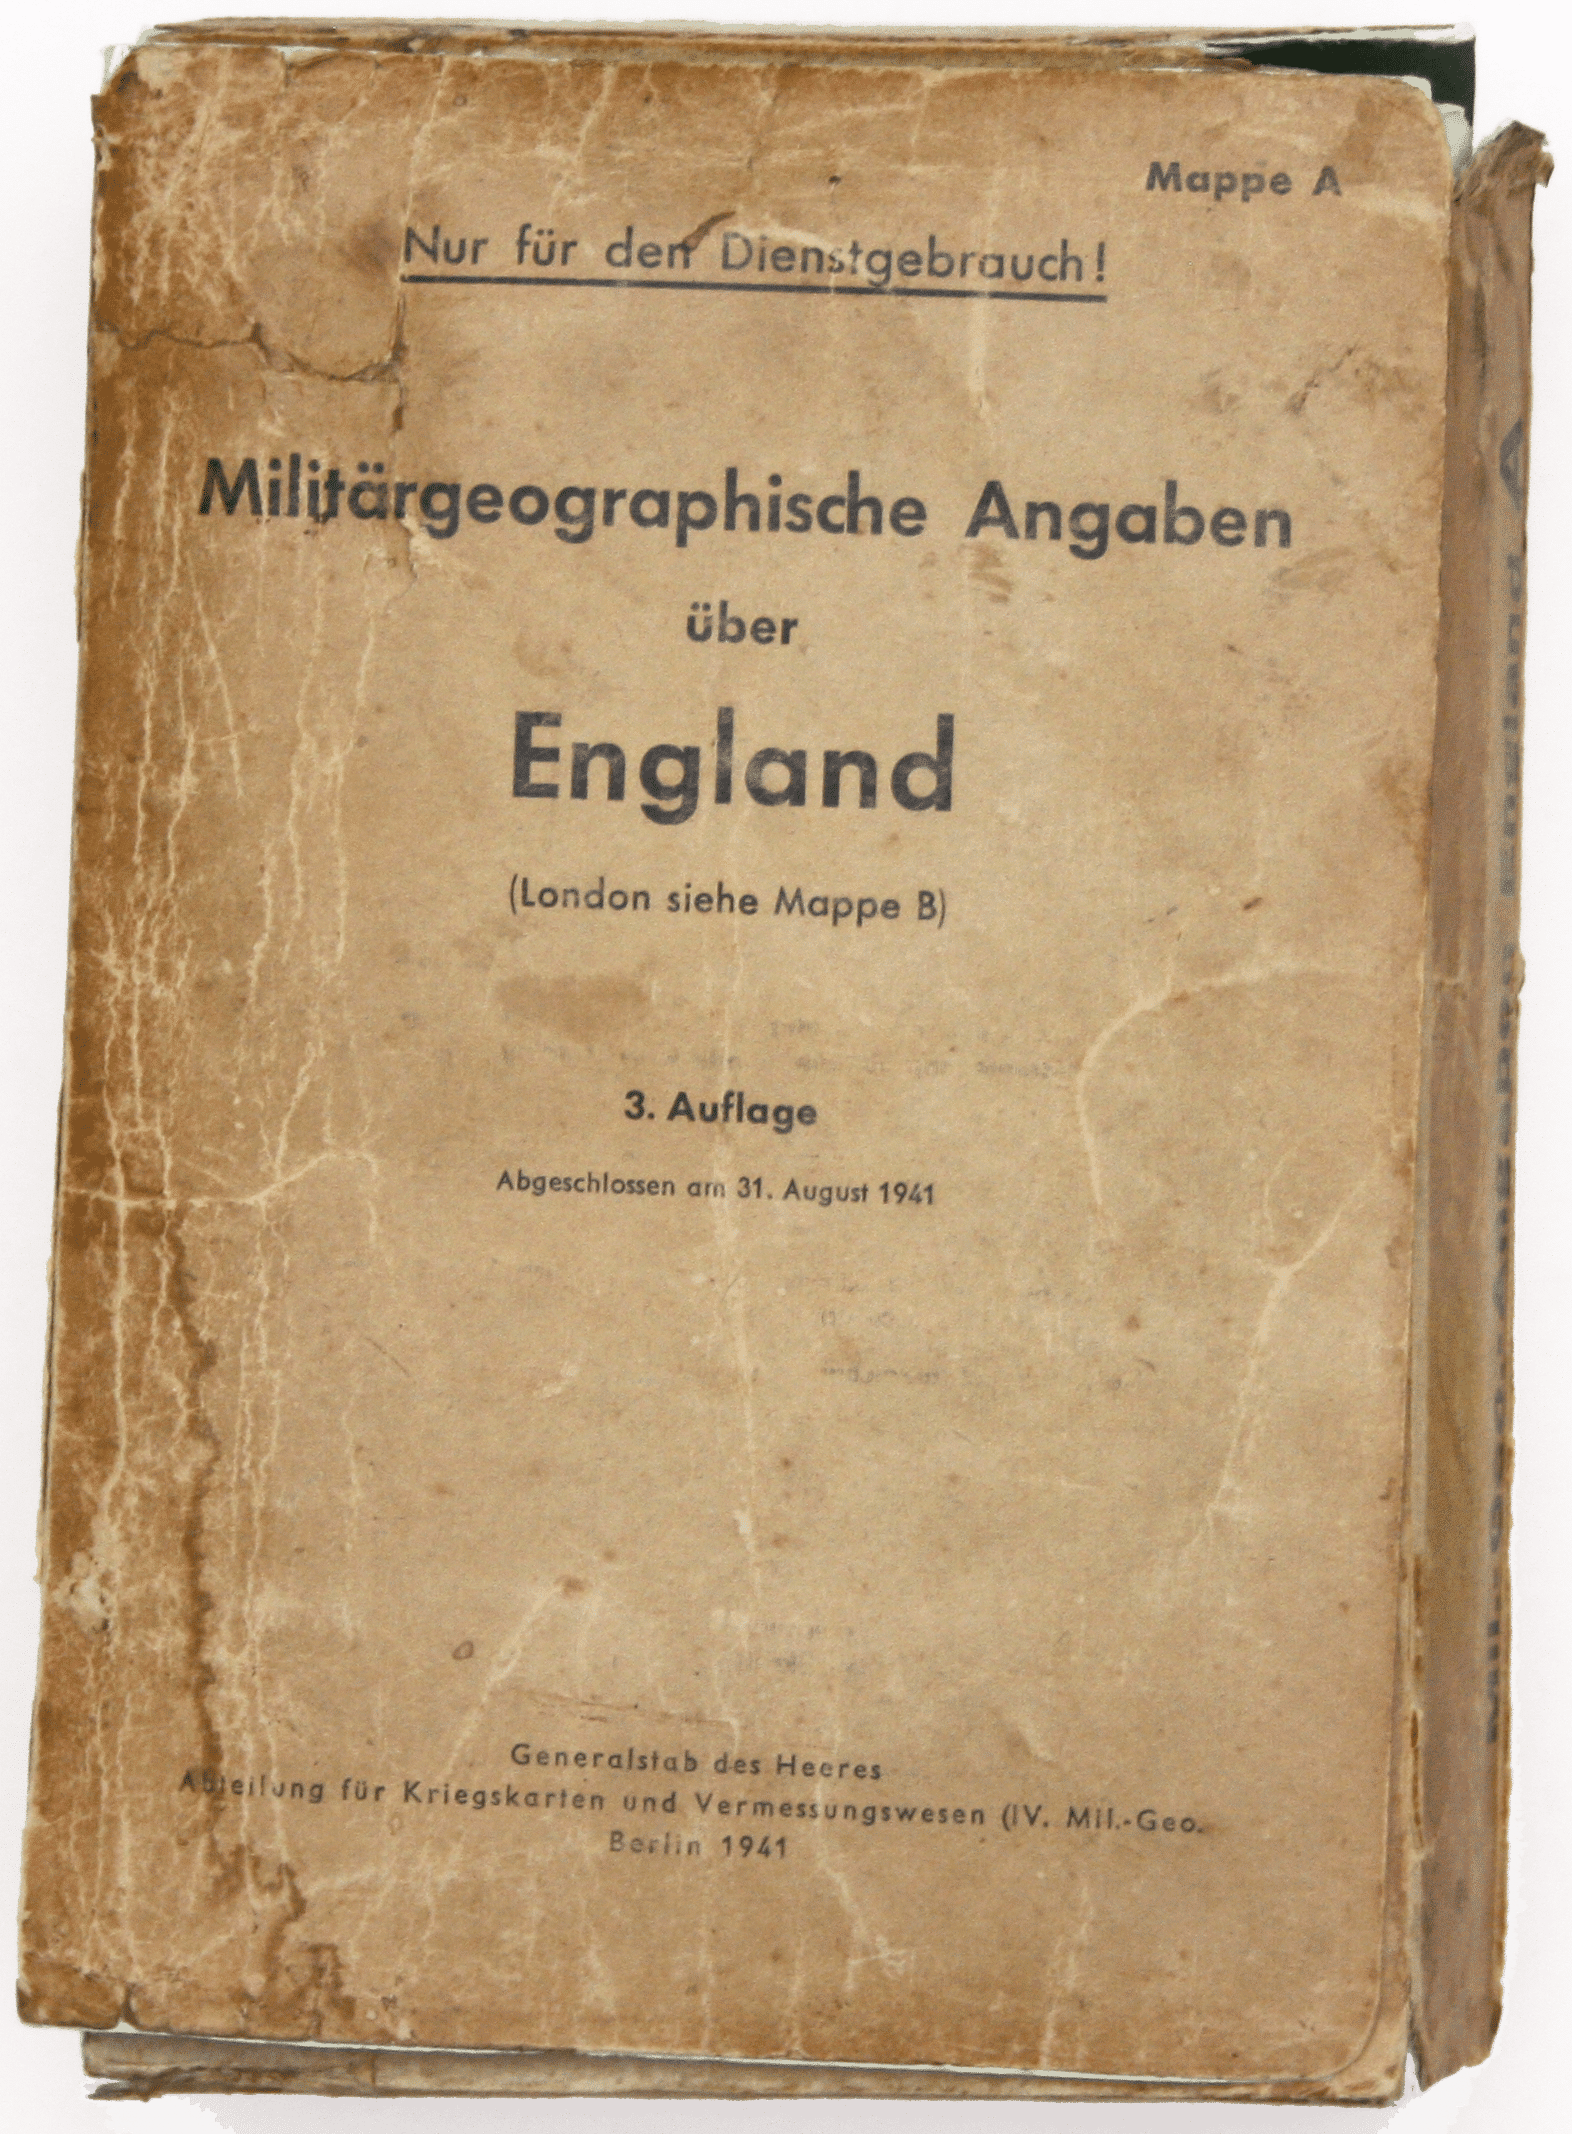 German Invasion Plans for England & Wales